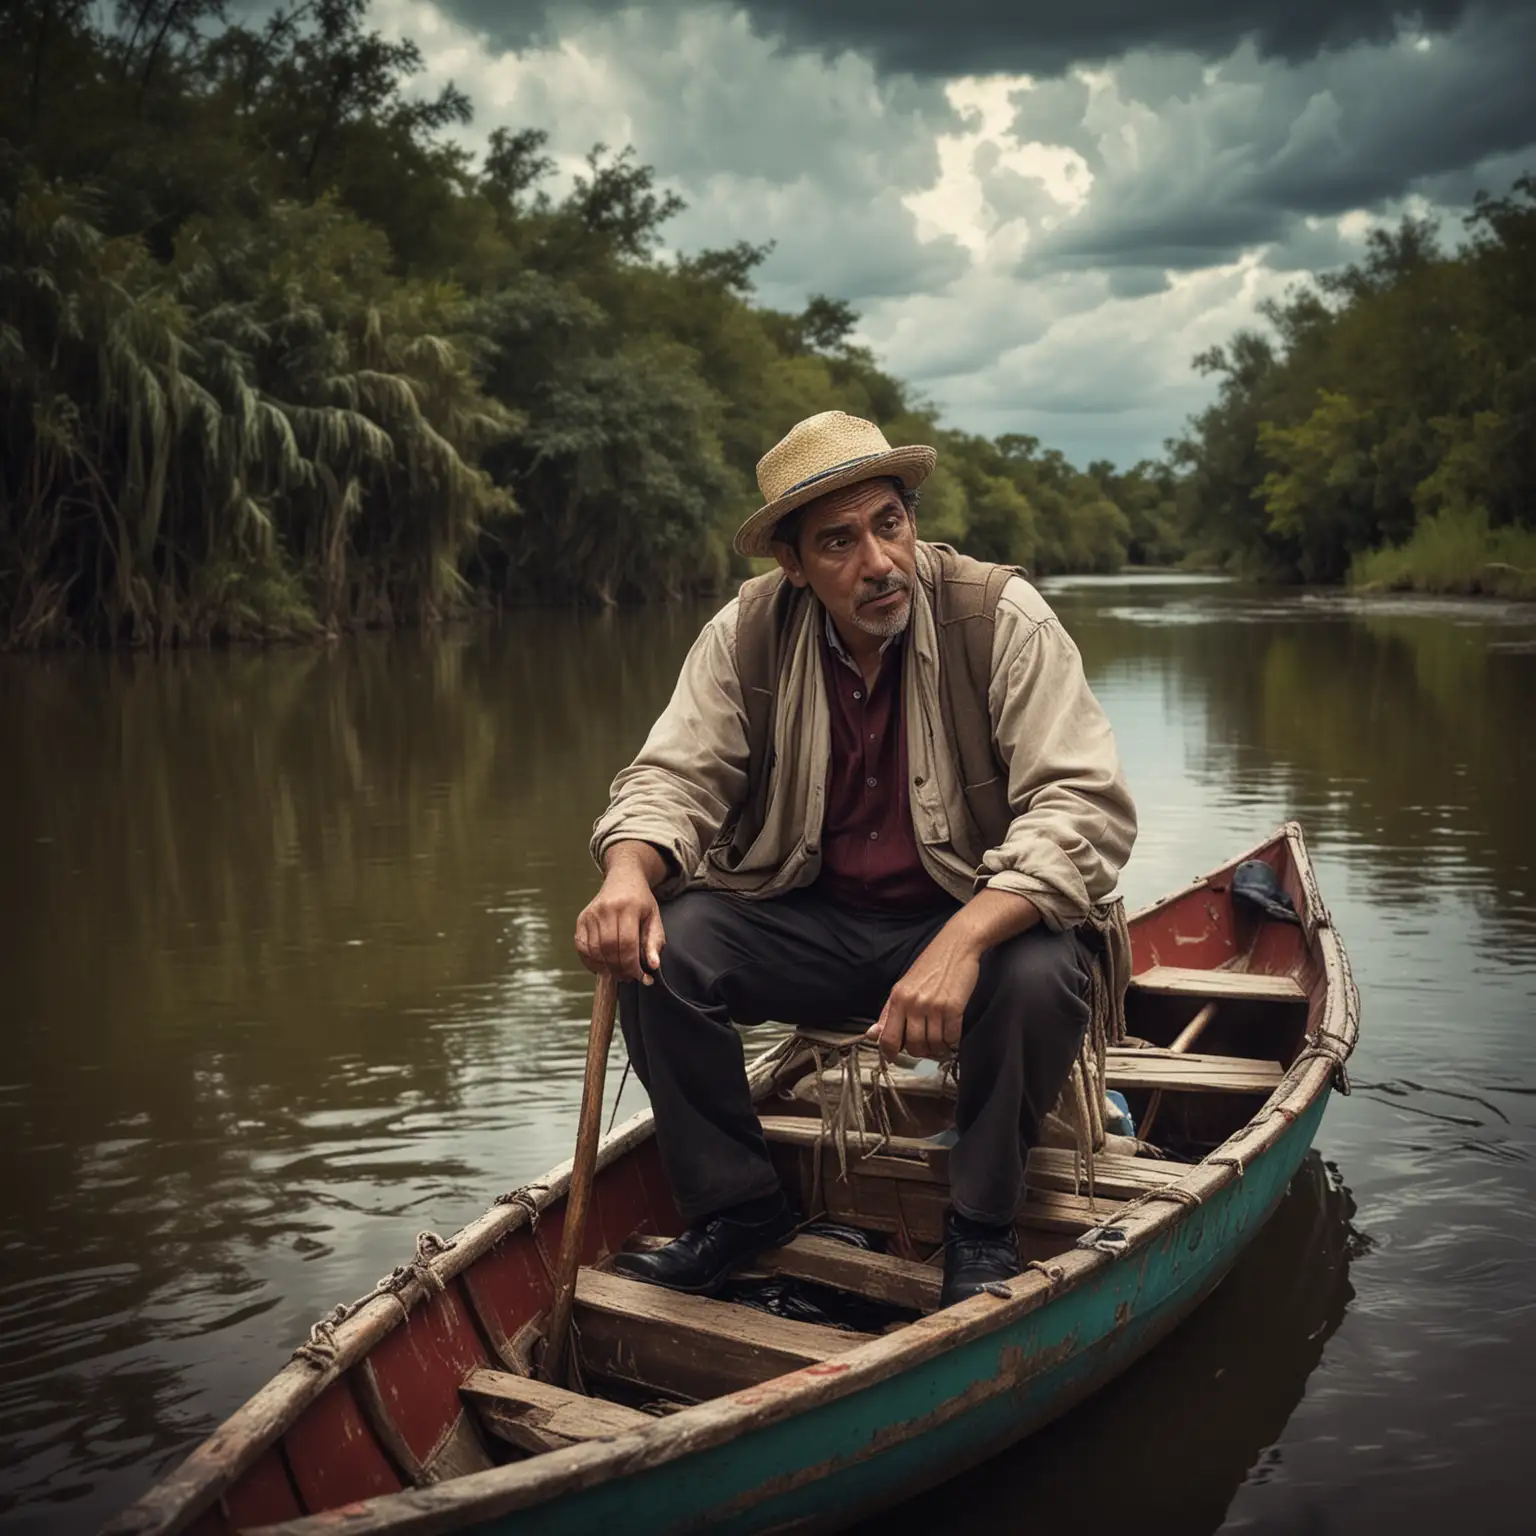 a middle age hispanic man holding a cane and sitting in a tiny boat on a river on a cloudy day, vibrant colors, dramatic lighting